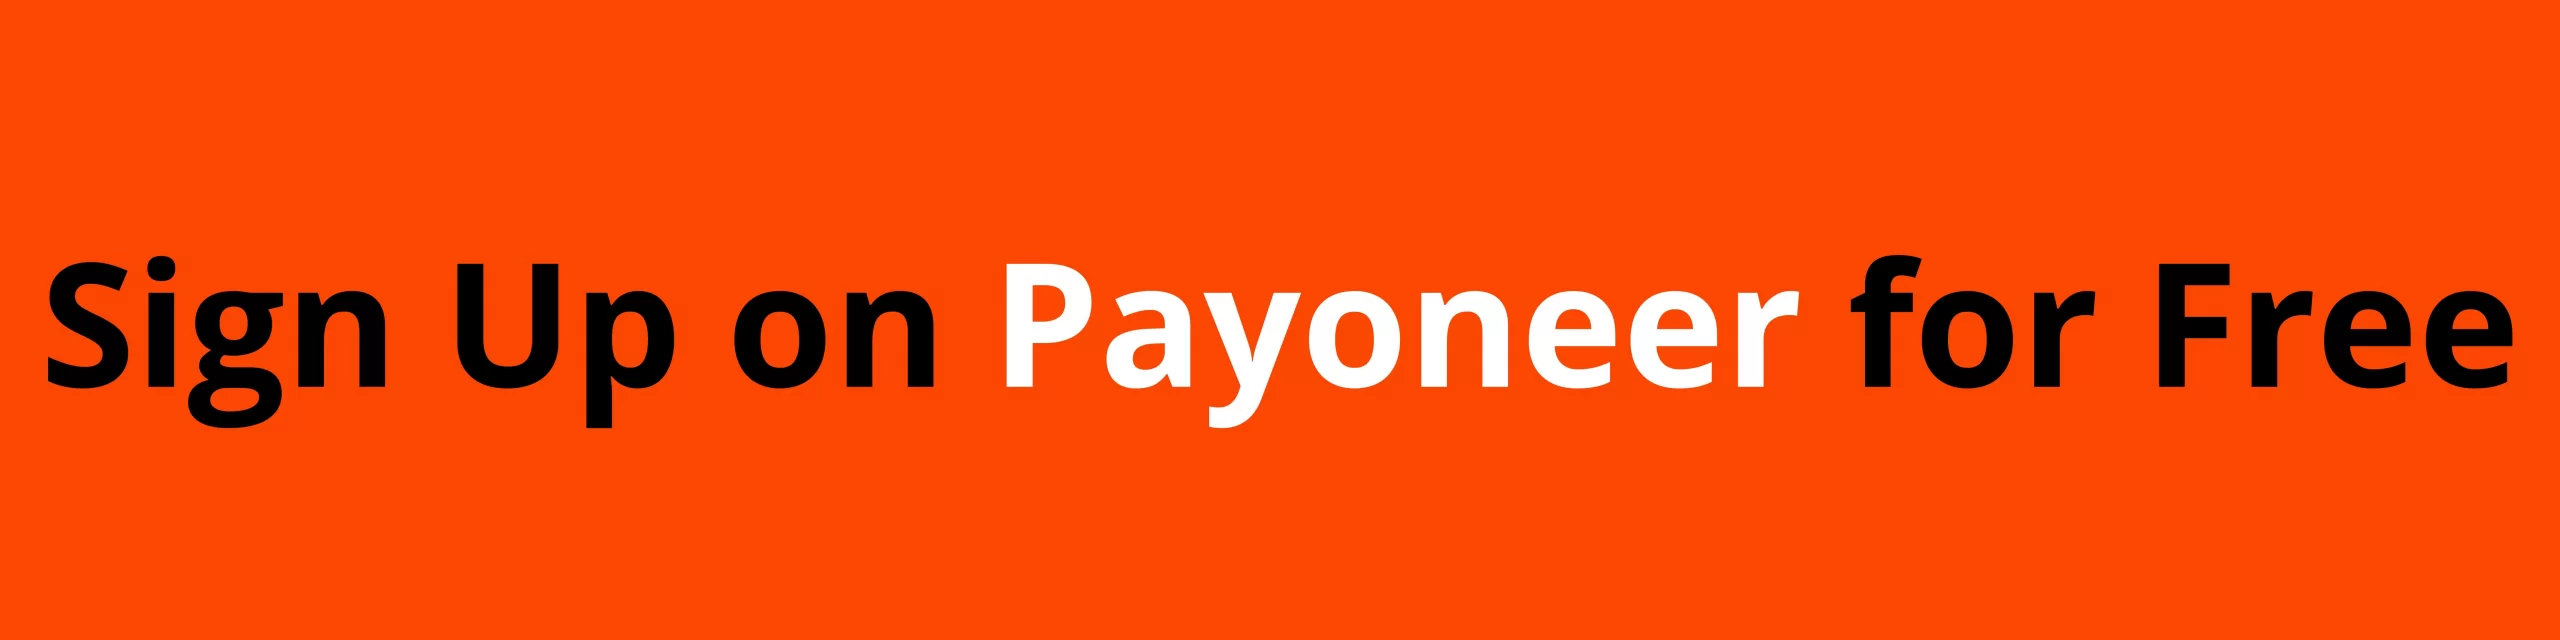 Sign Up on Payoneer